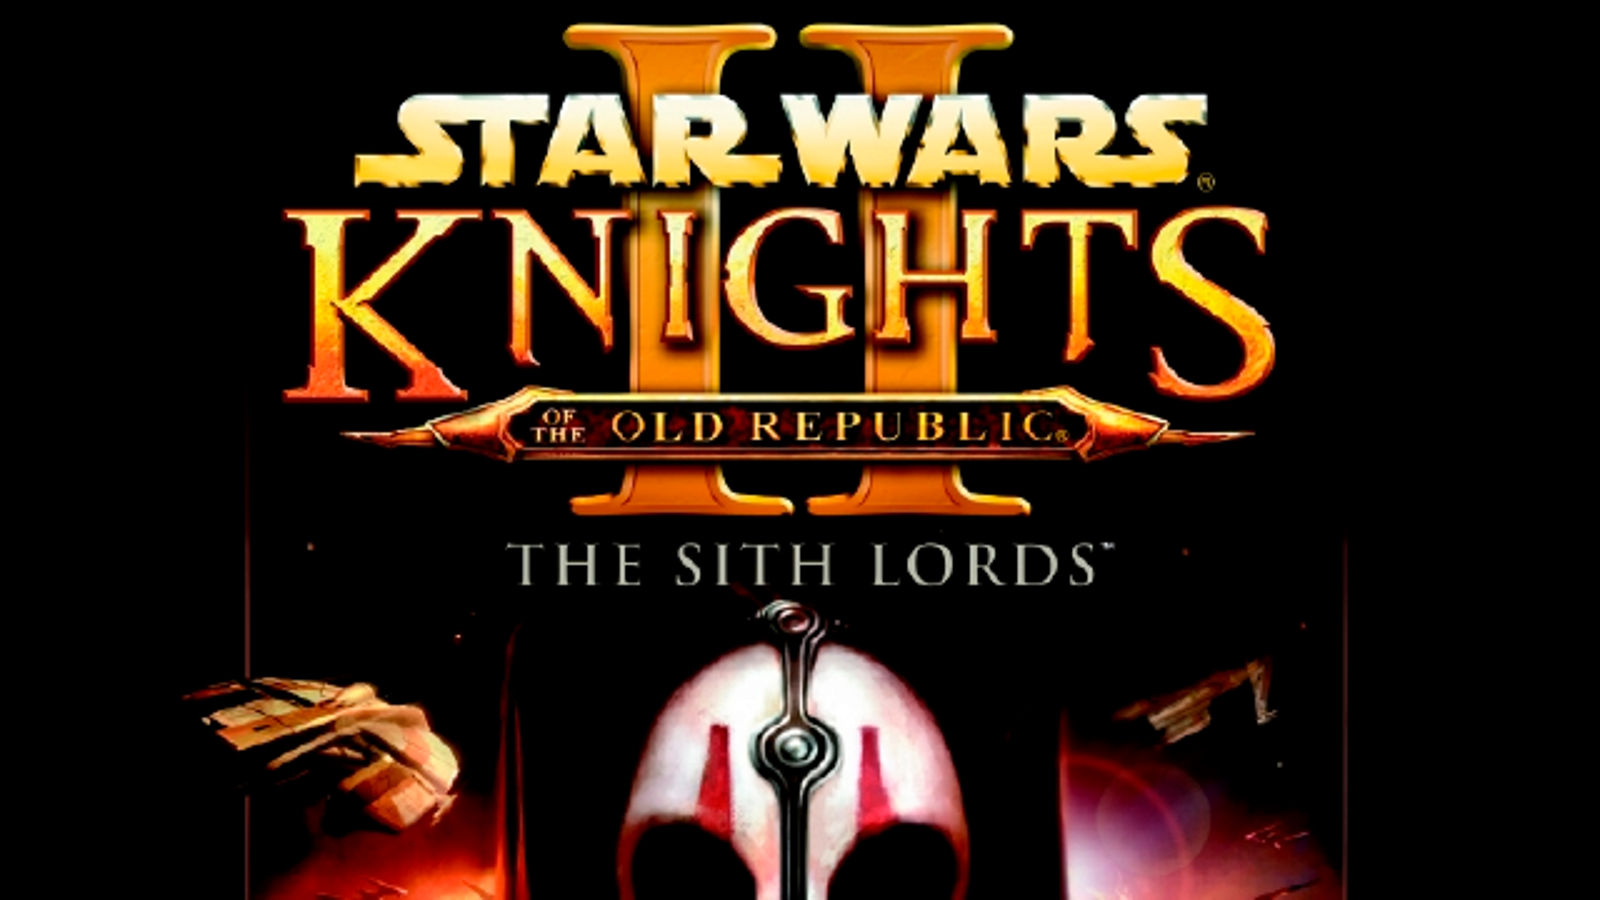 knights of the old republic ii update